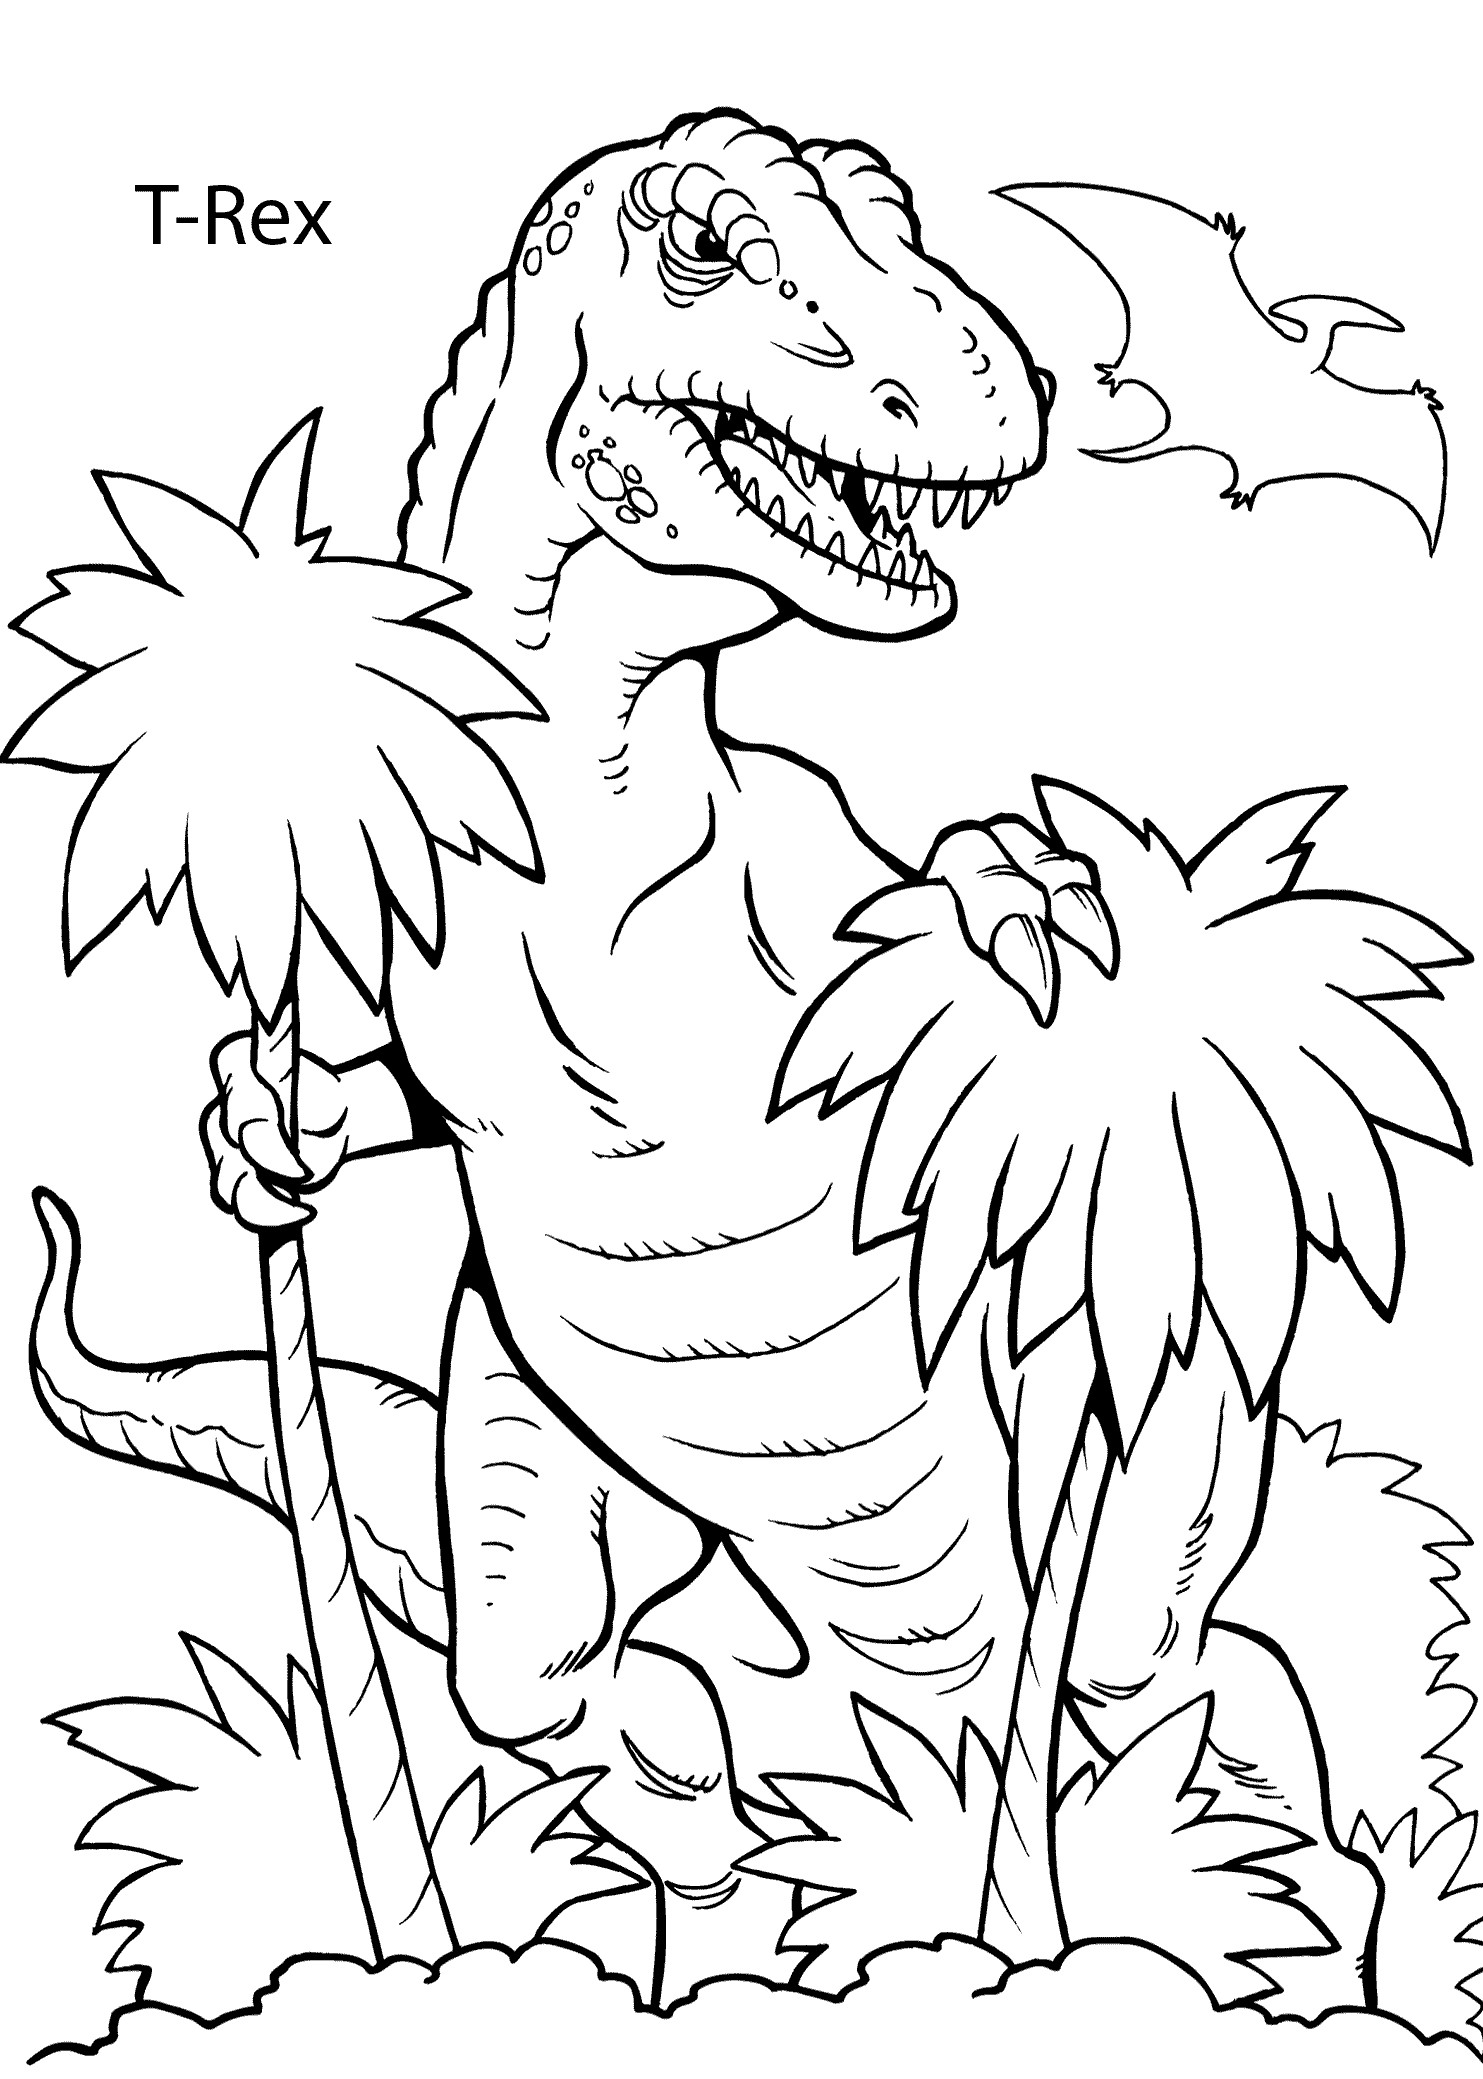 Dinosaur Coloring Sheets For Boys
 T Rex dinosaur coloring pages for kids printable free